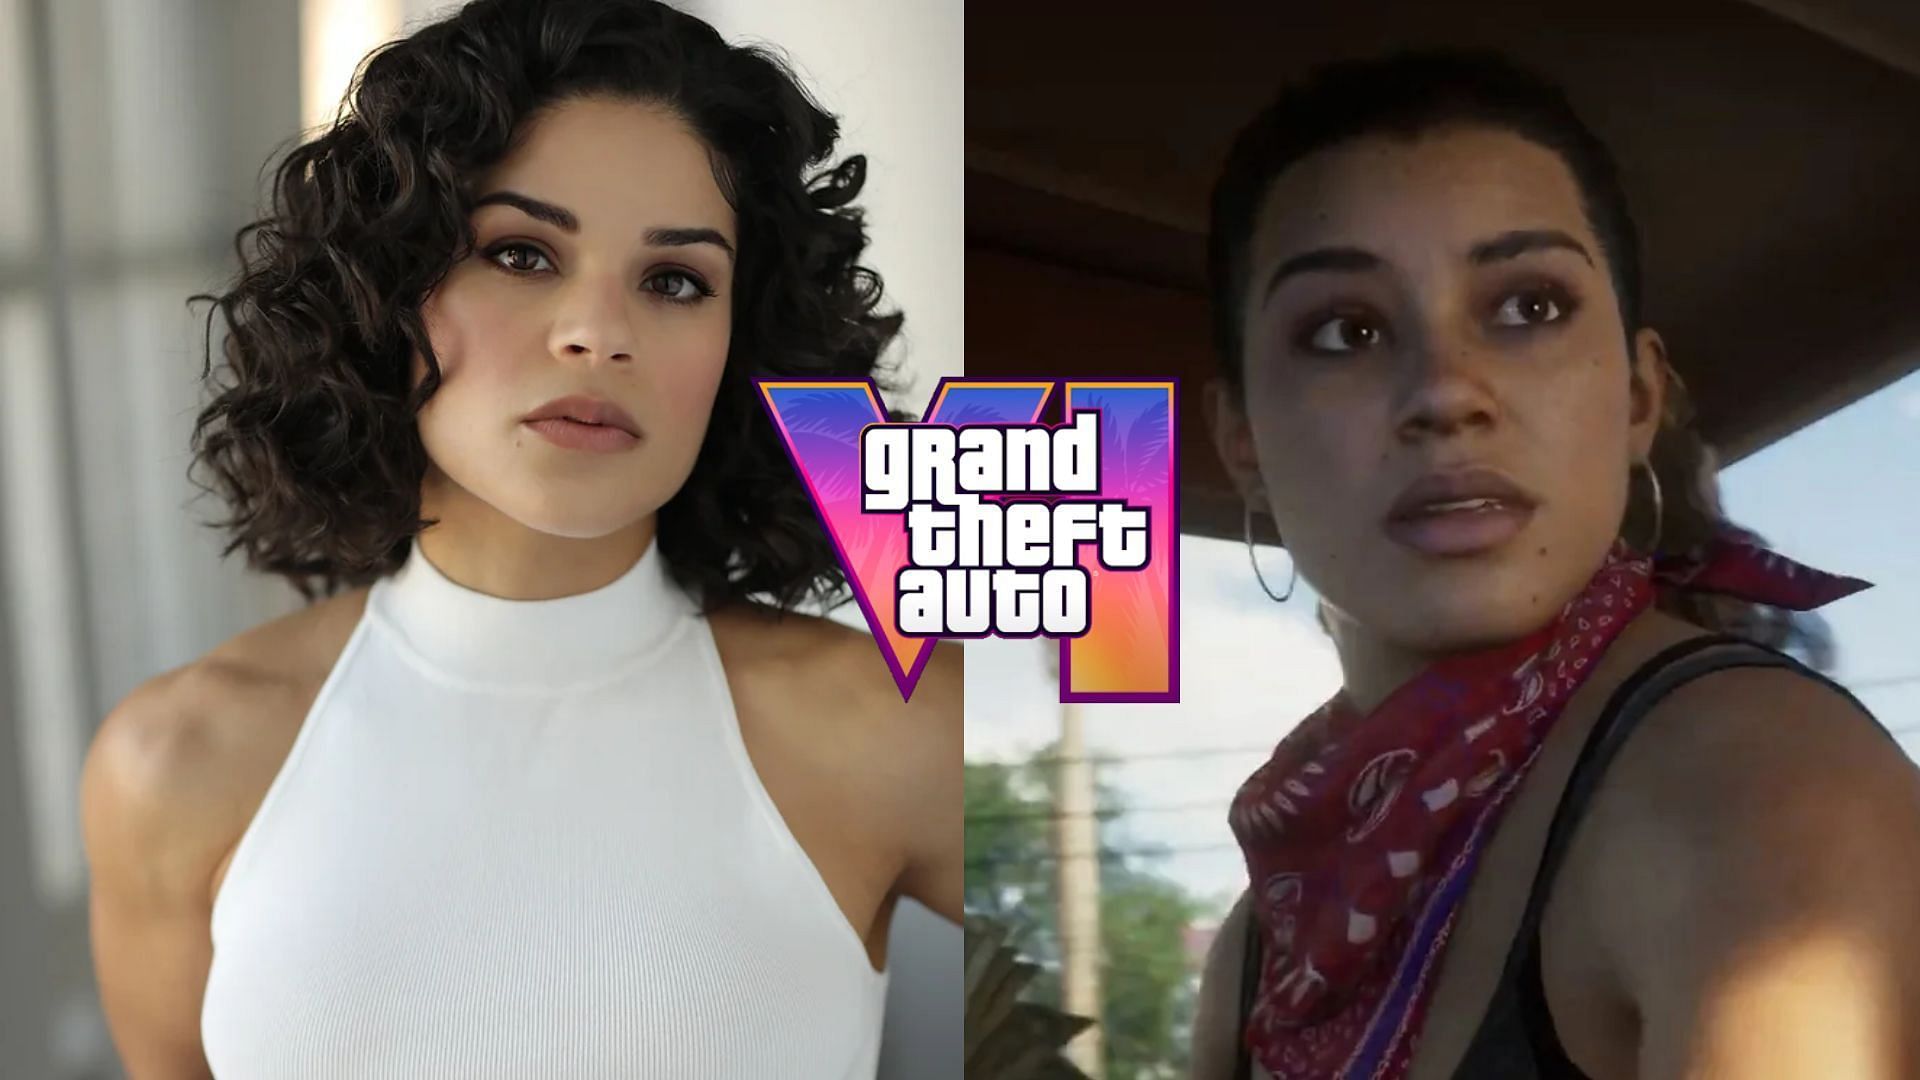 A brief report on who Manni L. Perez is and why some fans believe she might be GTA 6